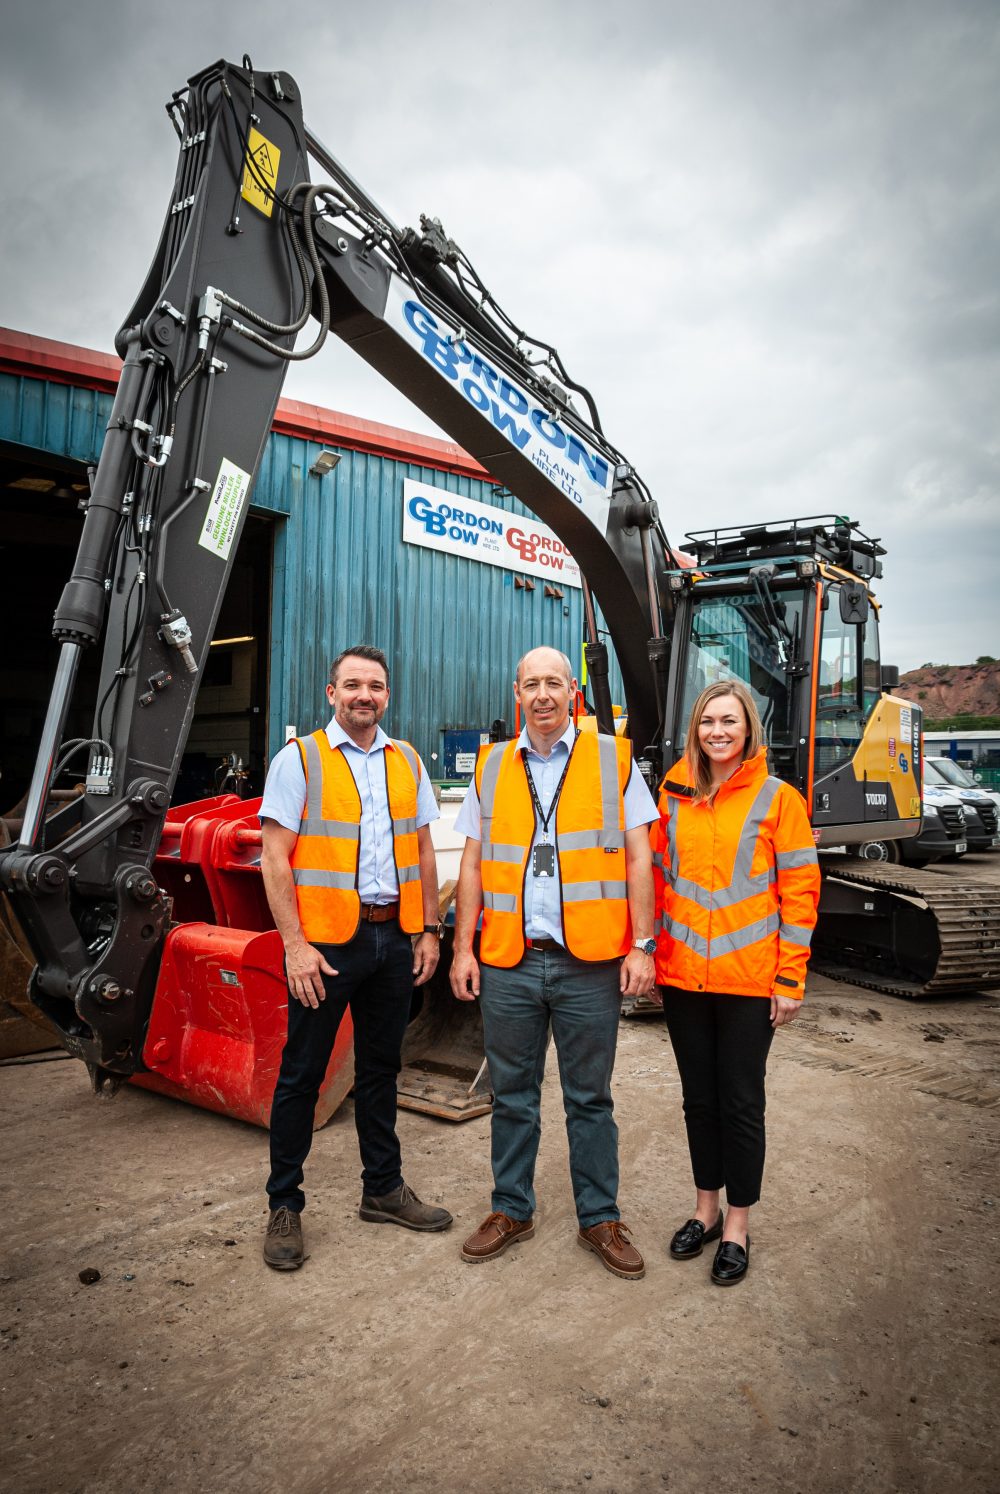 Gordon Bow Plant Hire invests in the future with Volvo Construction Equipment